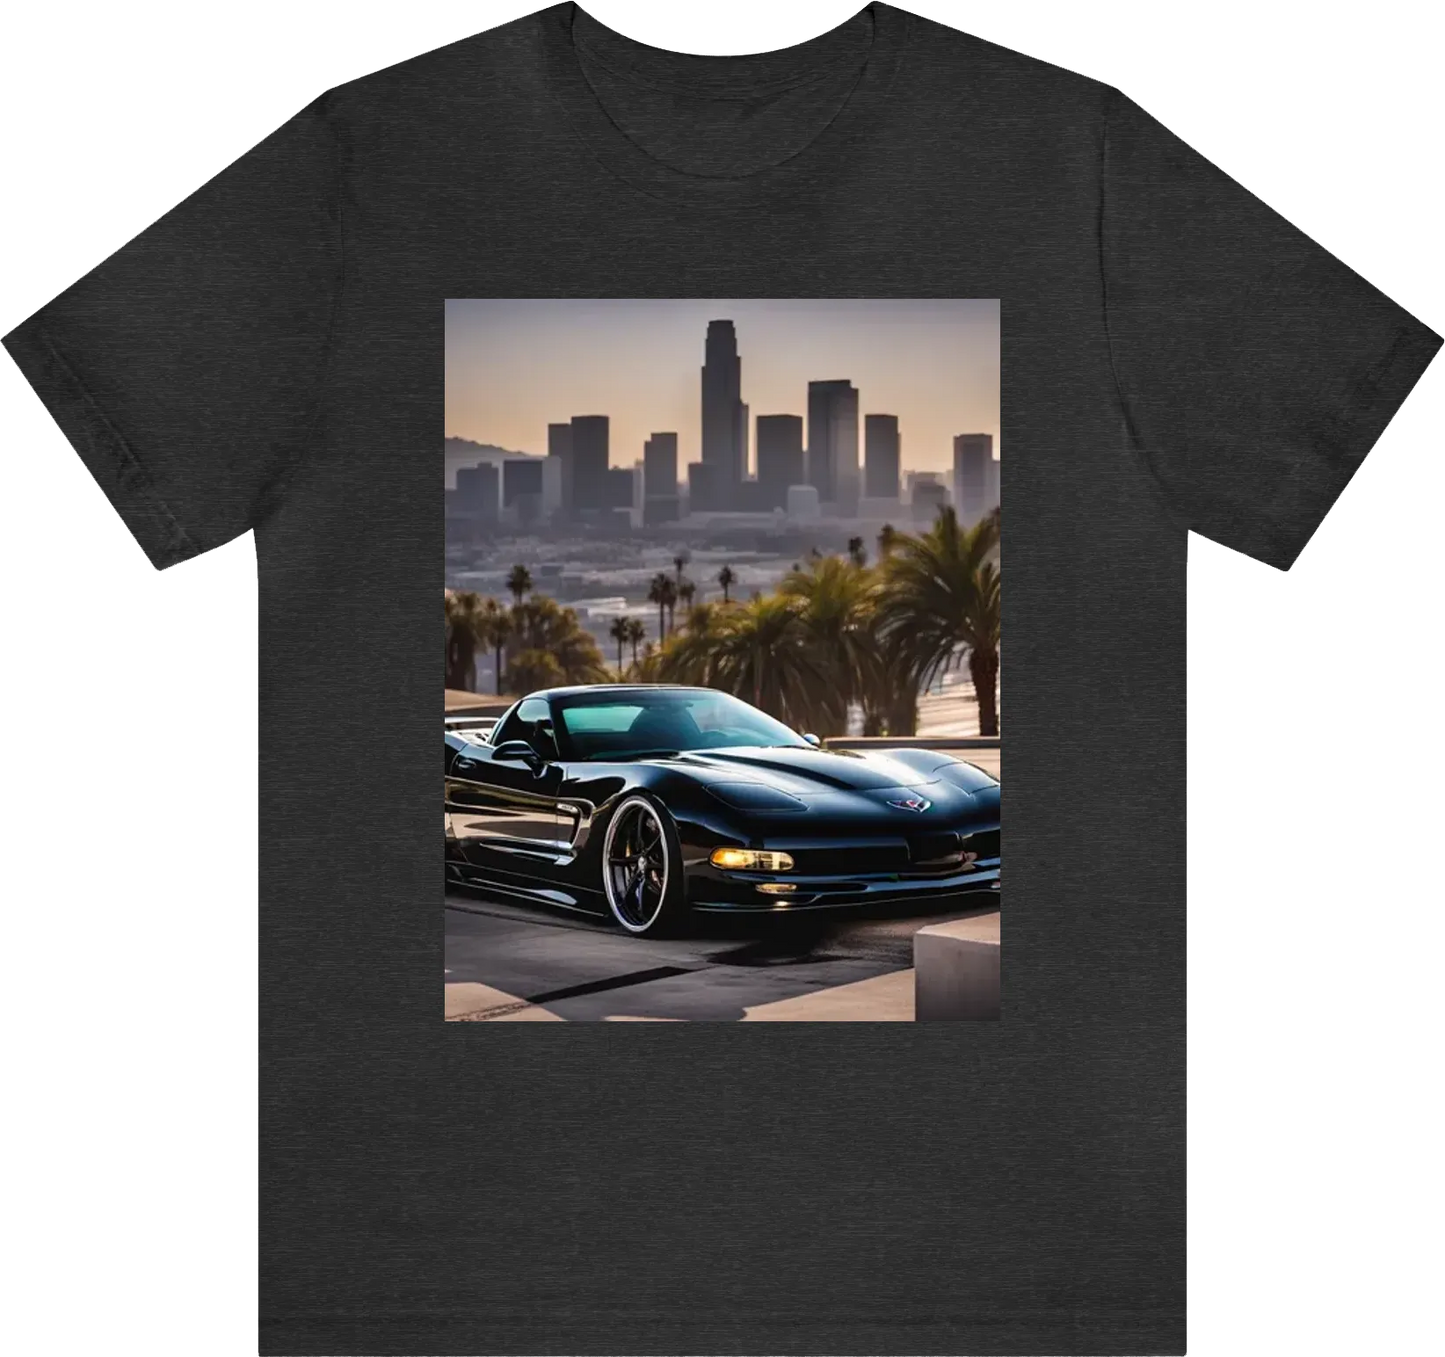 Lowered 2002 black chevy Corvette on shiny chrome rims with the downtown los Angeles skyline, comic 8k, 4k